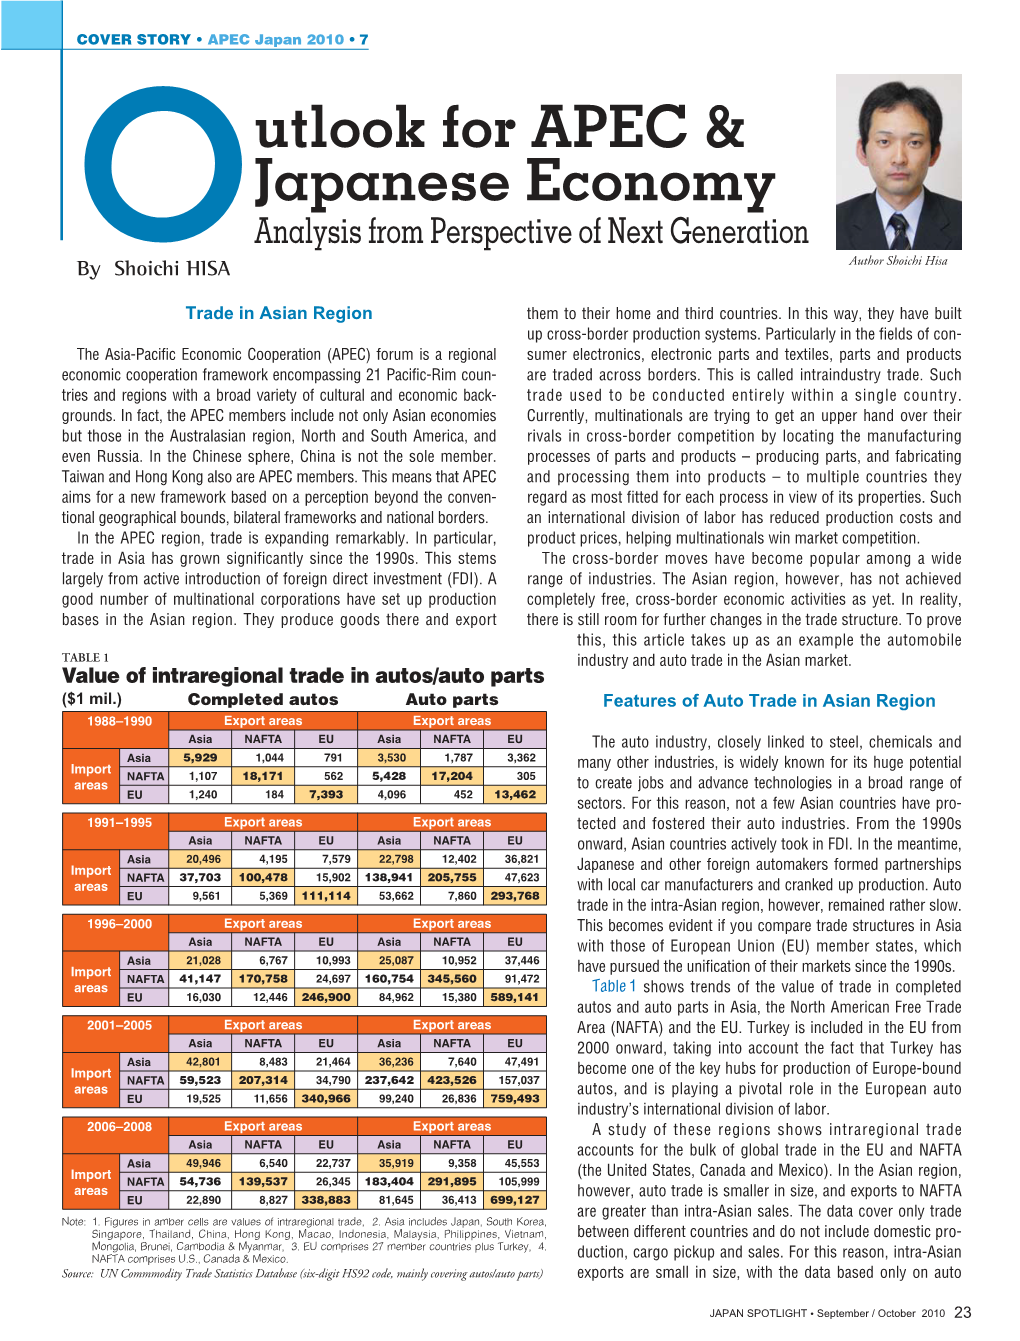 Outlook for APEC & Japanese Economy